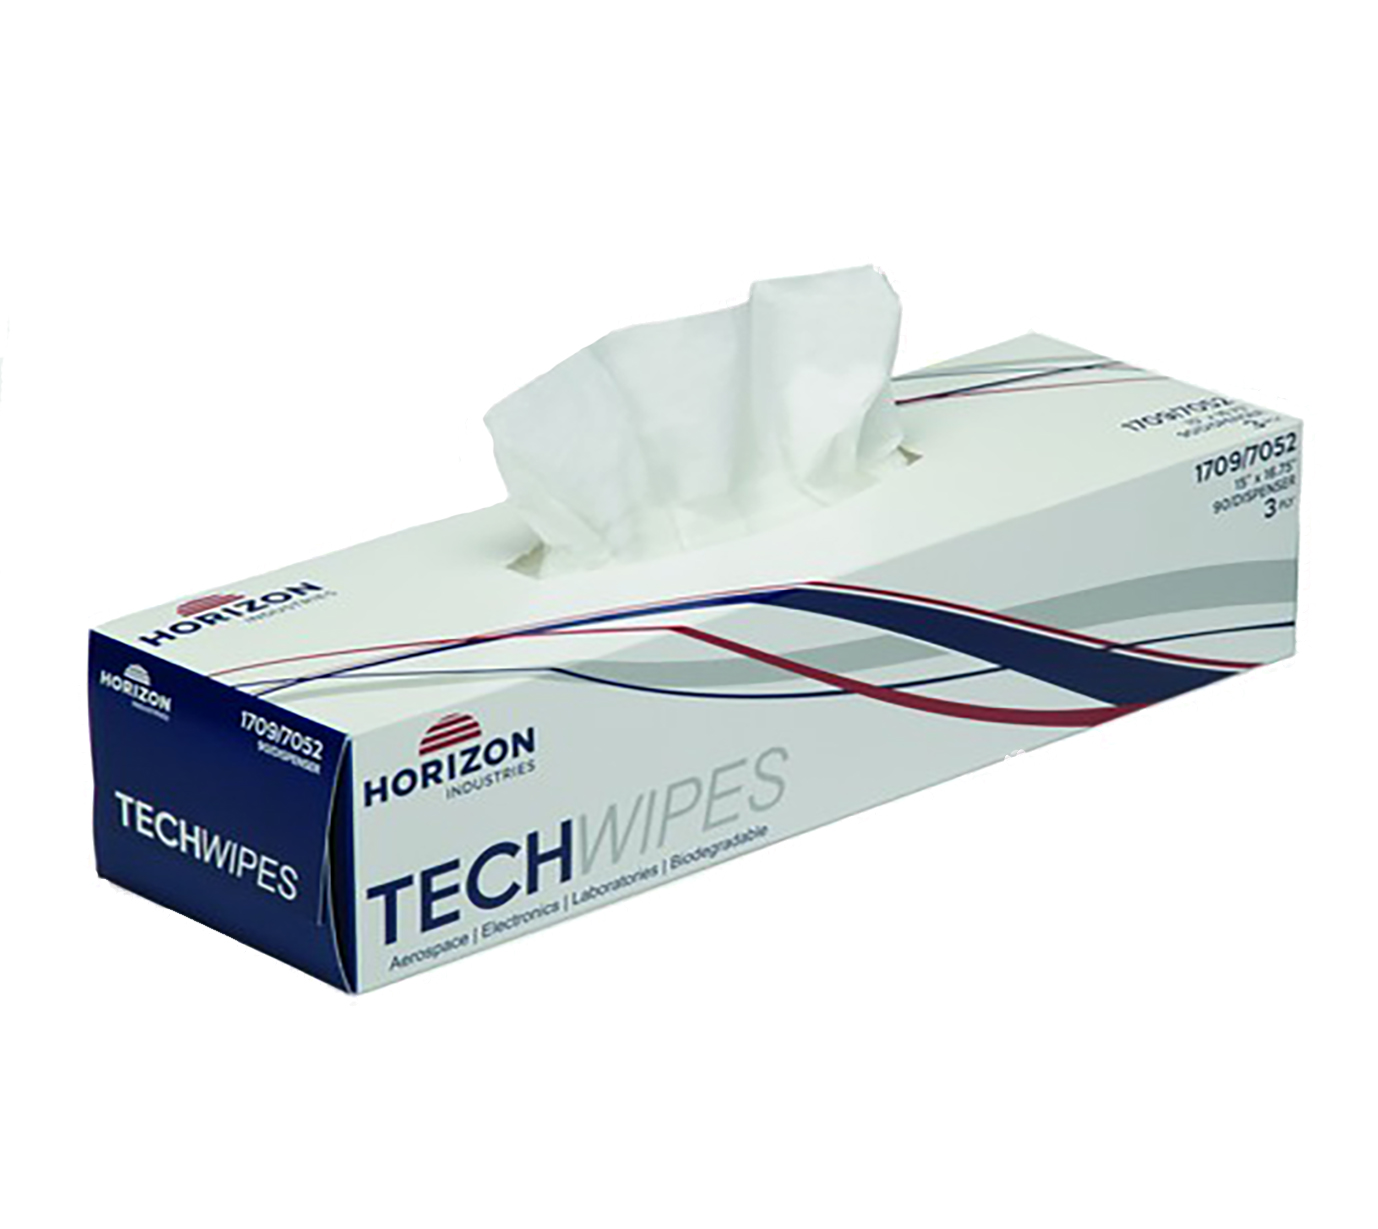 1709 - 3-Ply Tissue TechWipes